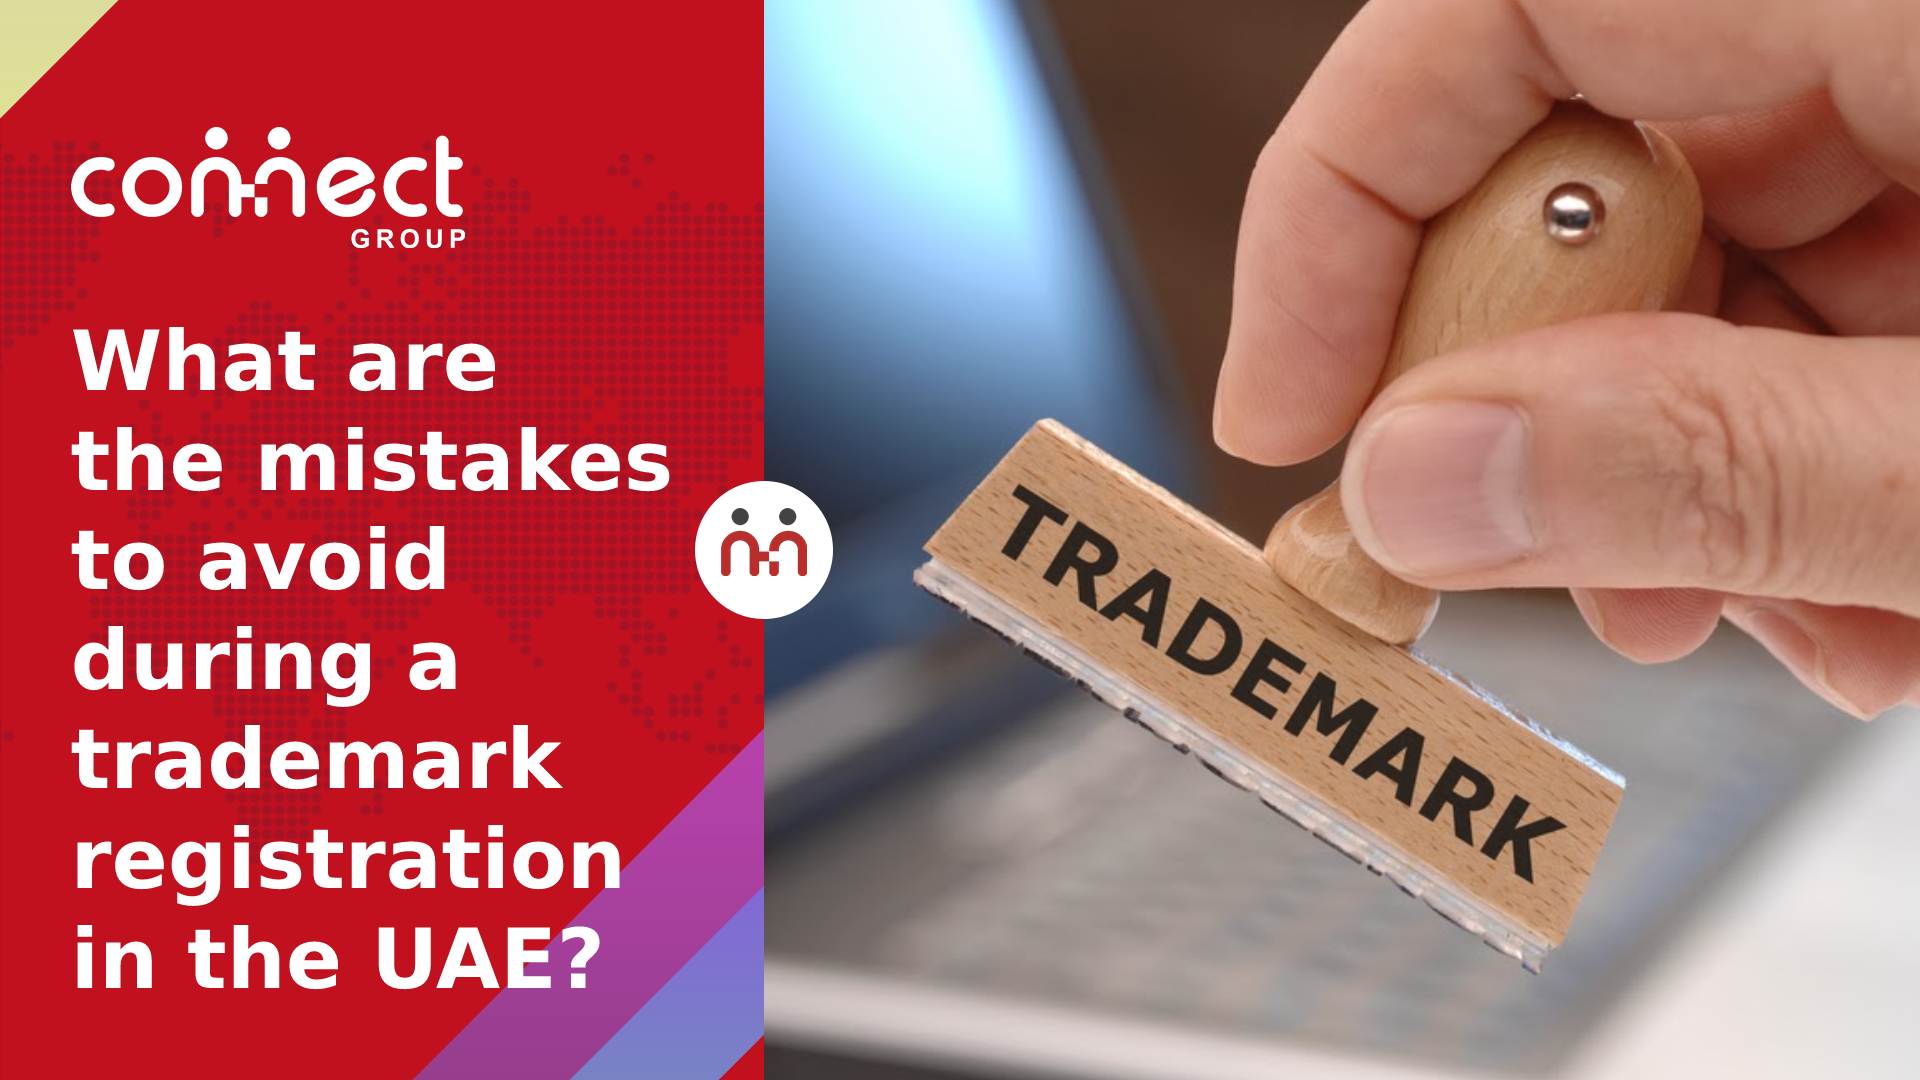 What are the mistakes to avoid during a trademark registration in the UAE?